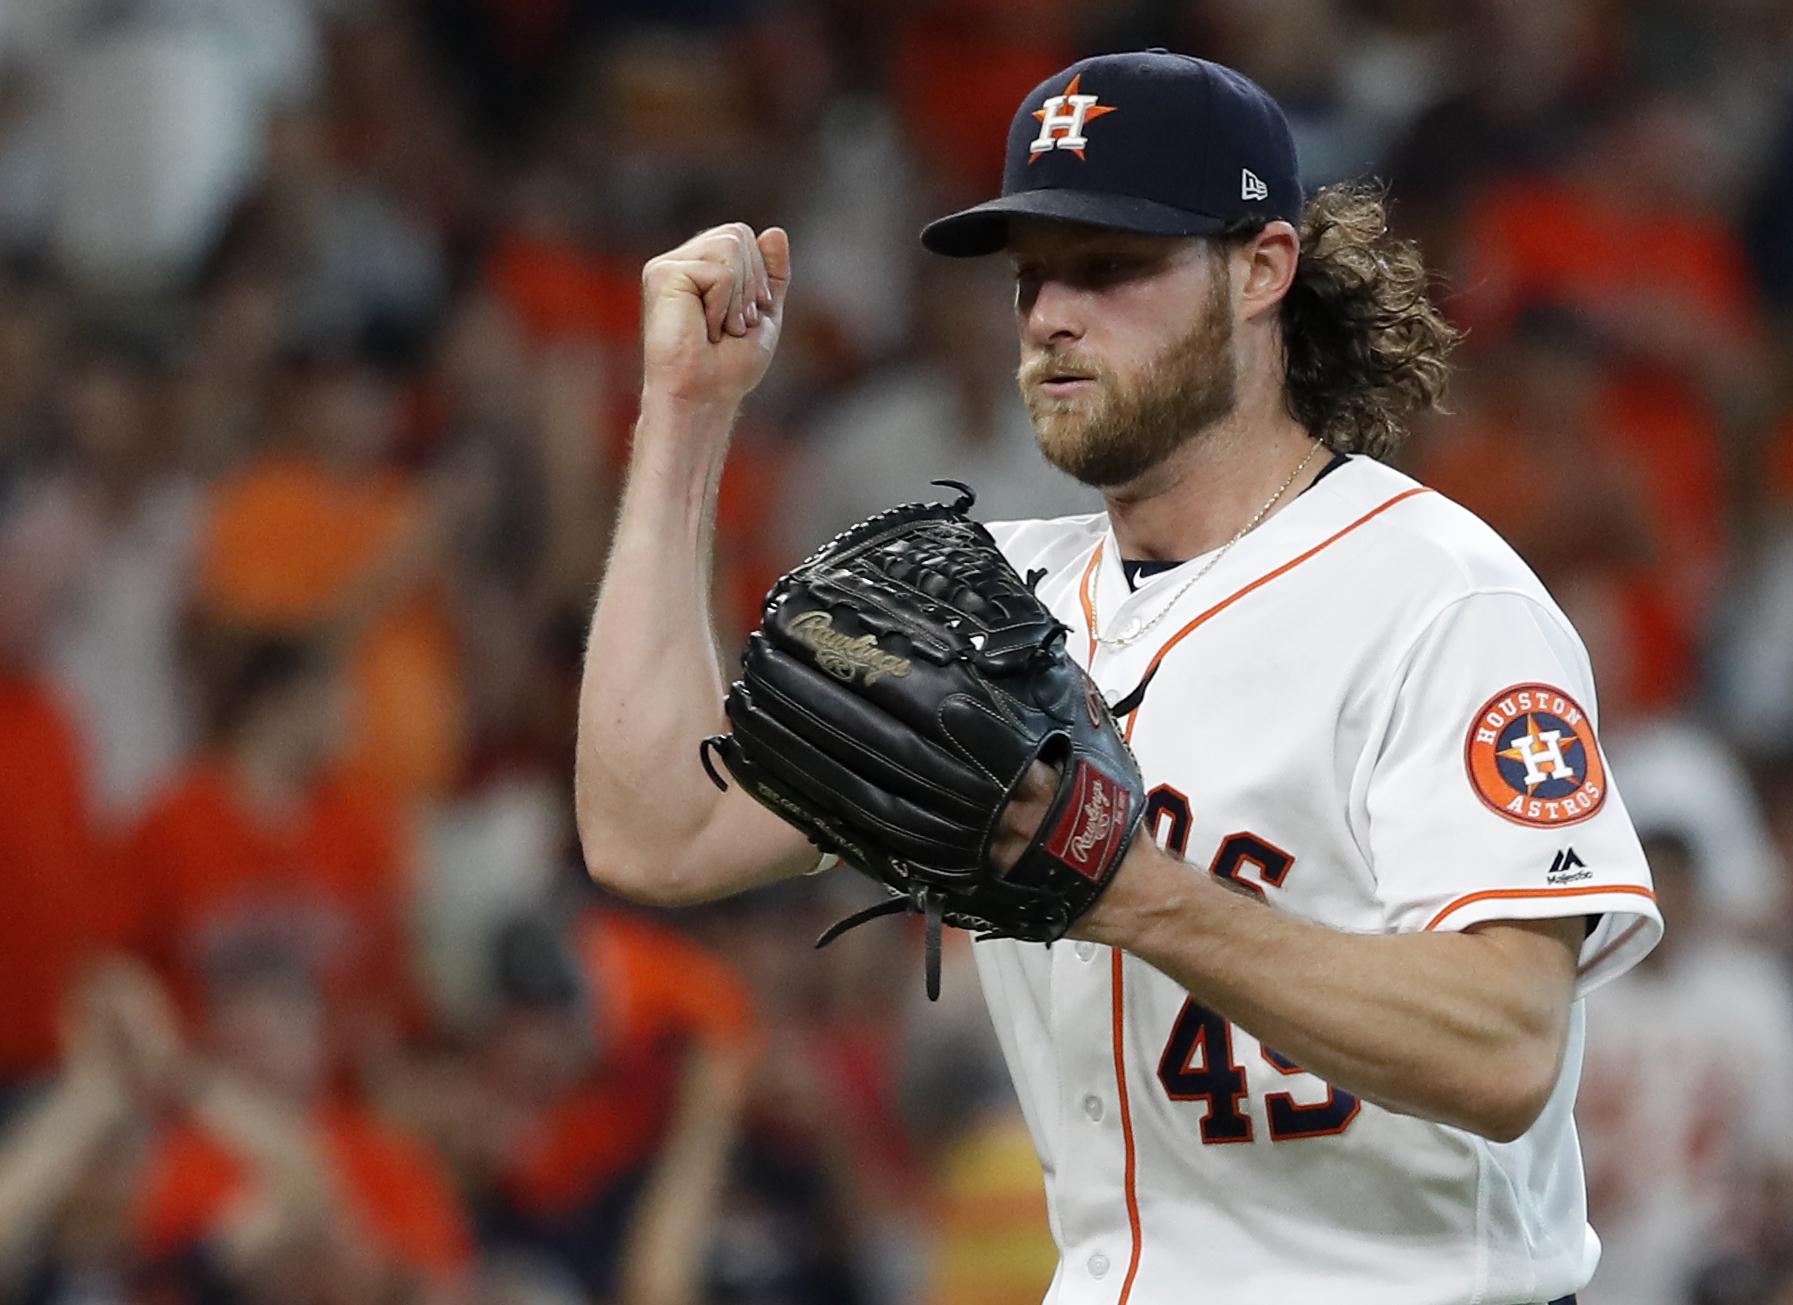 Date set for Gerrit Cole's arbitration hearing with Astros